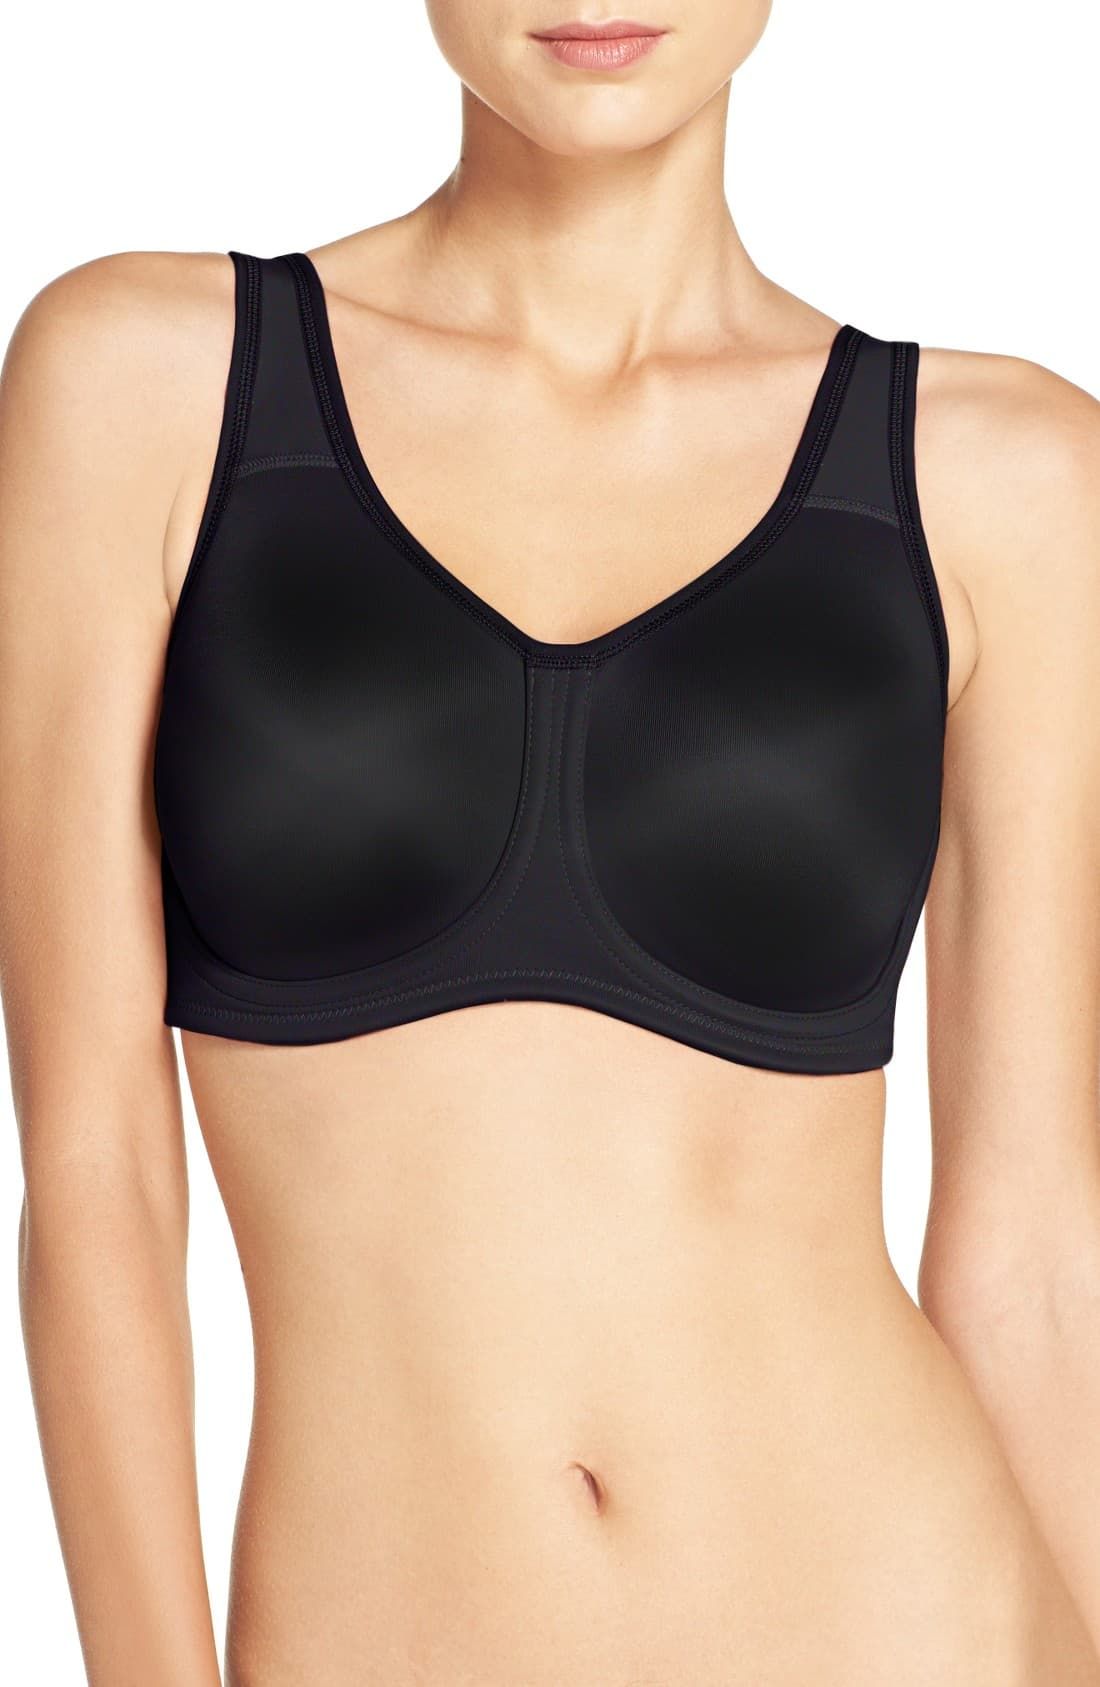 best sports bra for running large bust